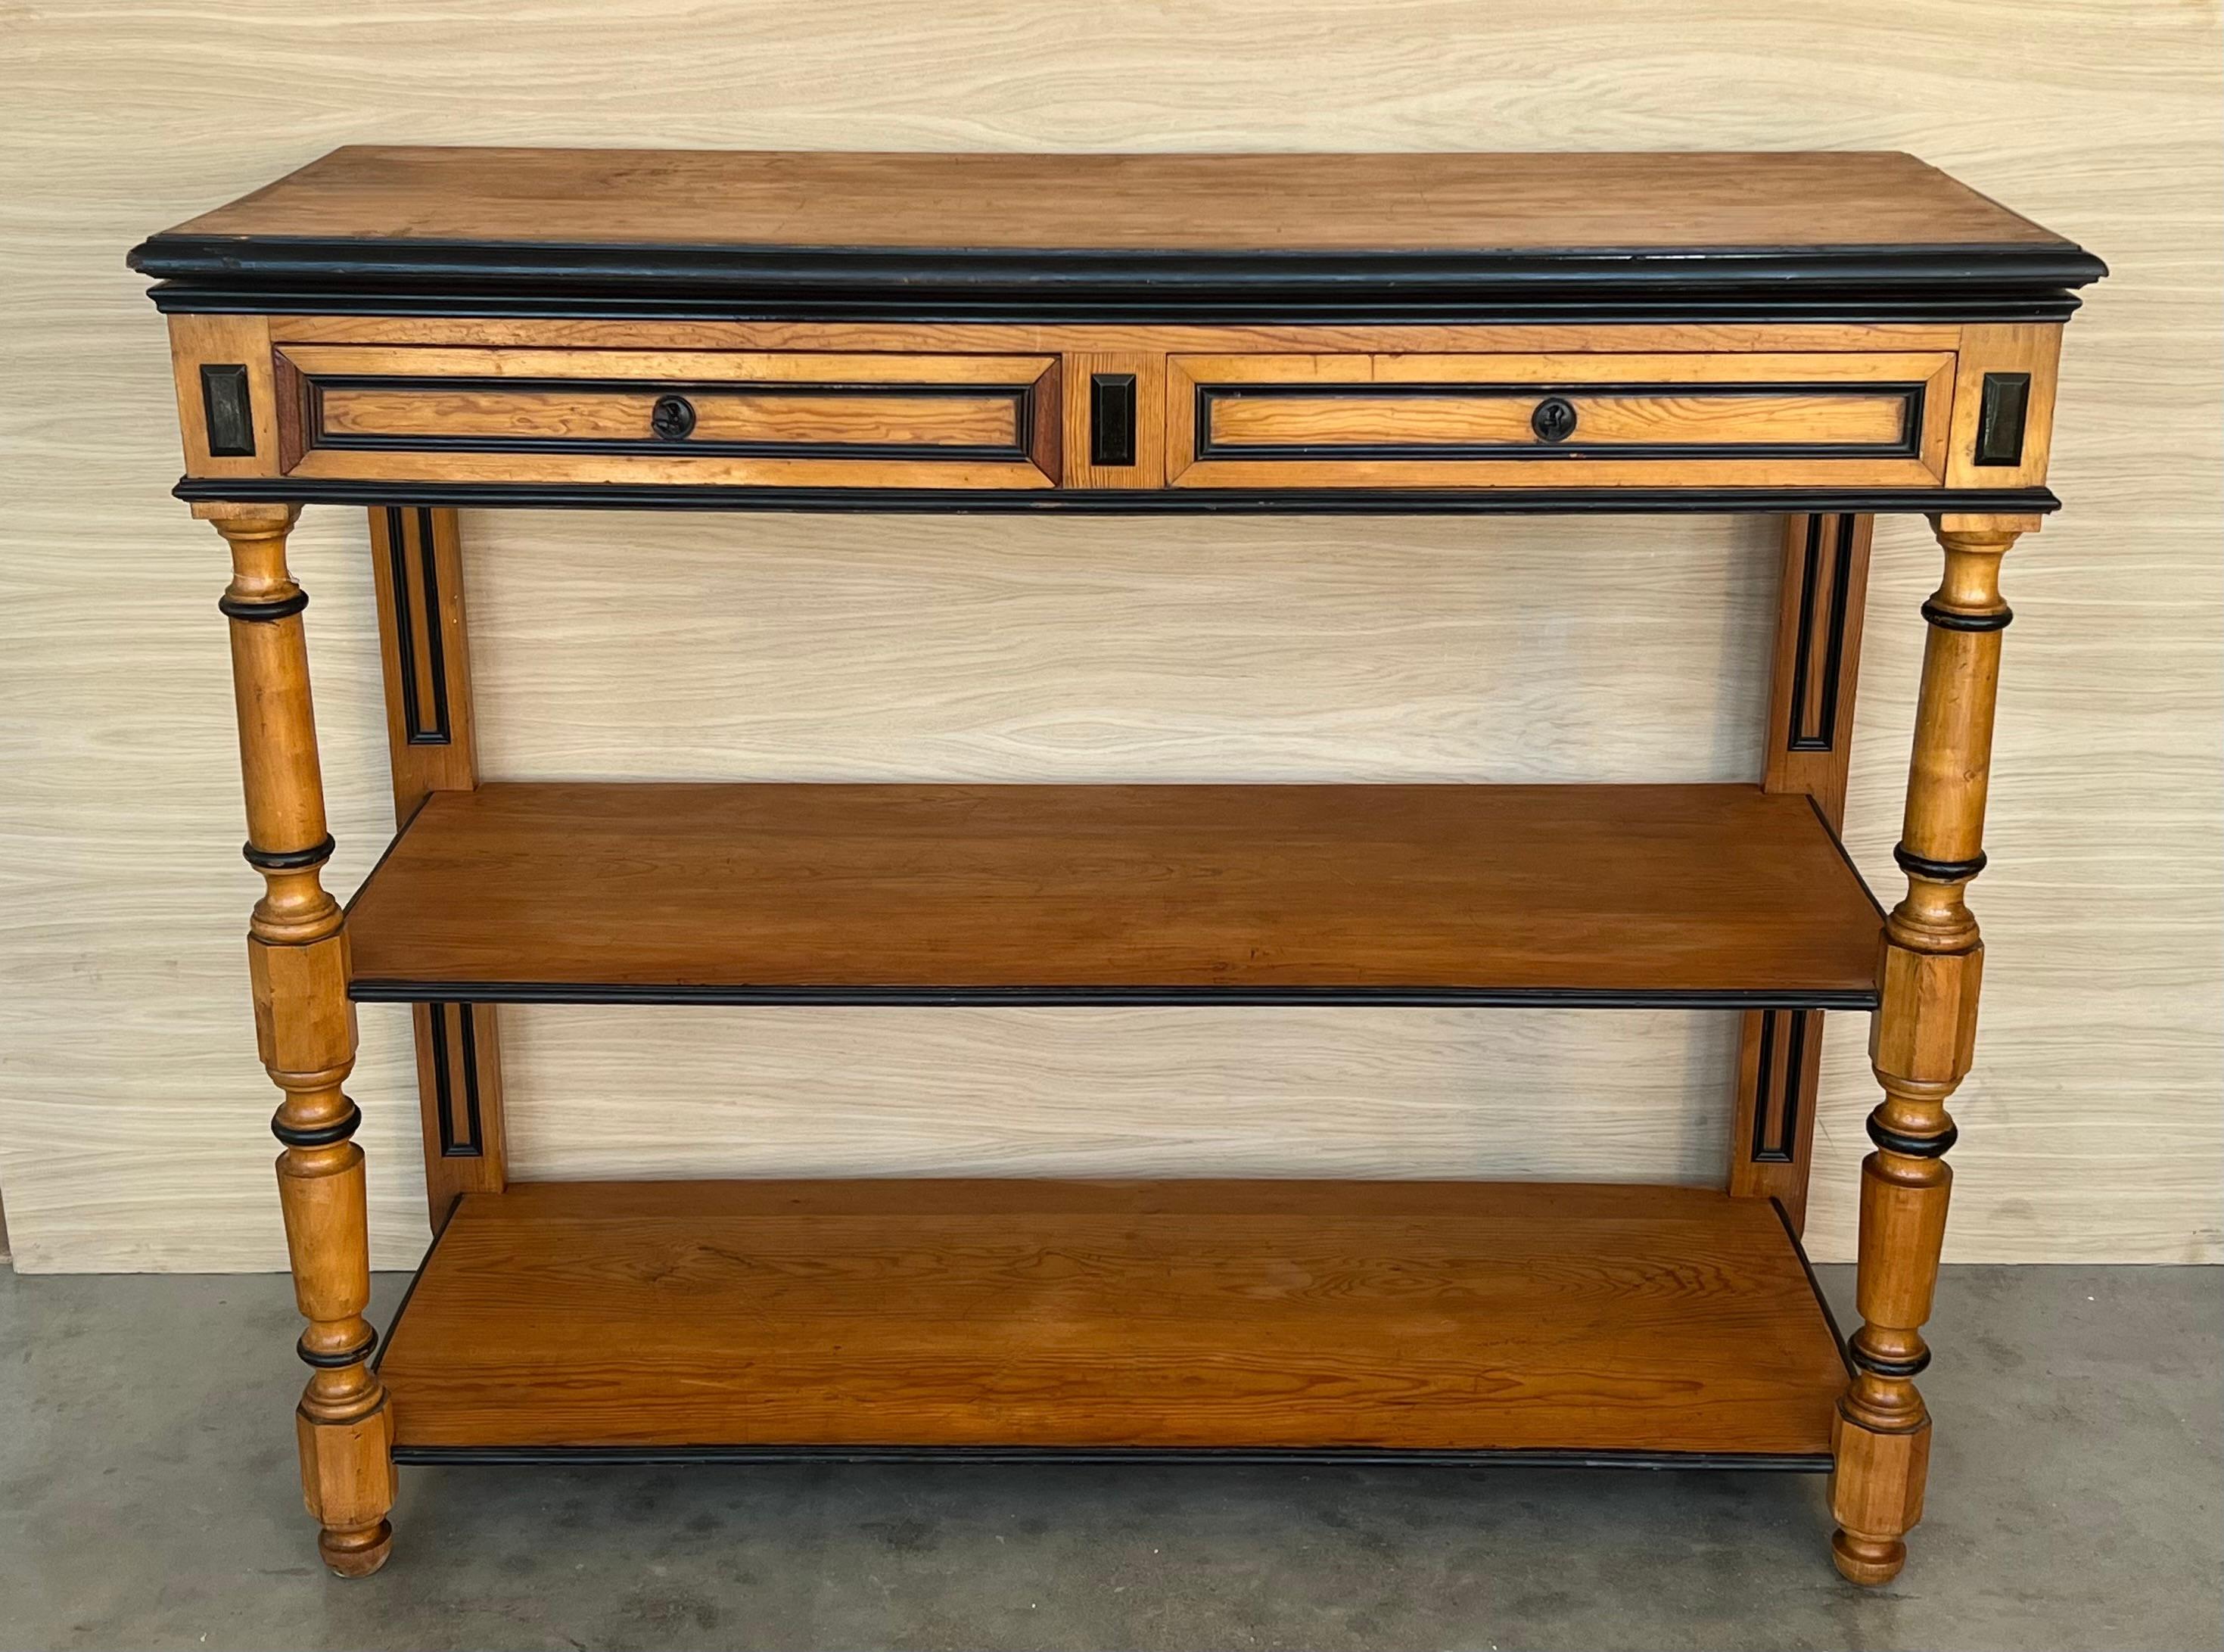 20th Century Early 20th C English Lemontree Three Tier Server or Buffet with Drawers For Sale